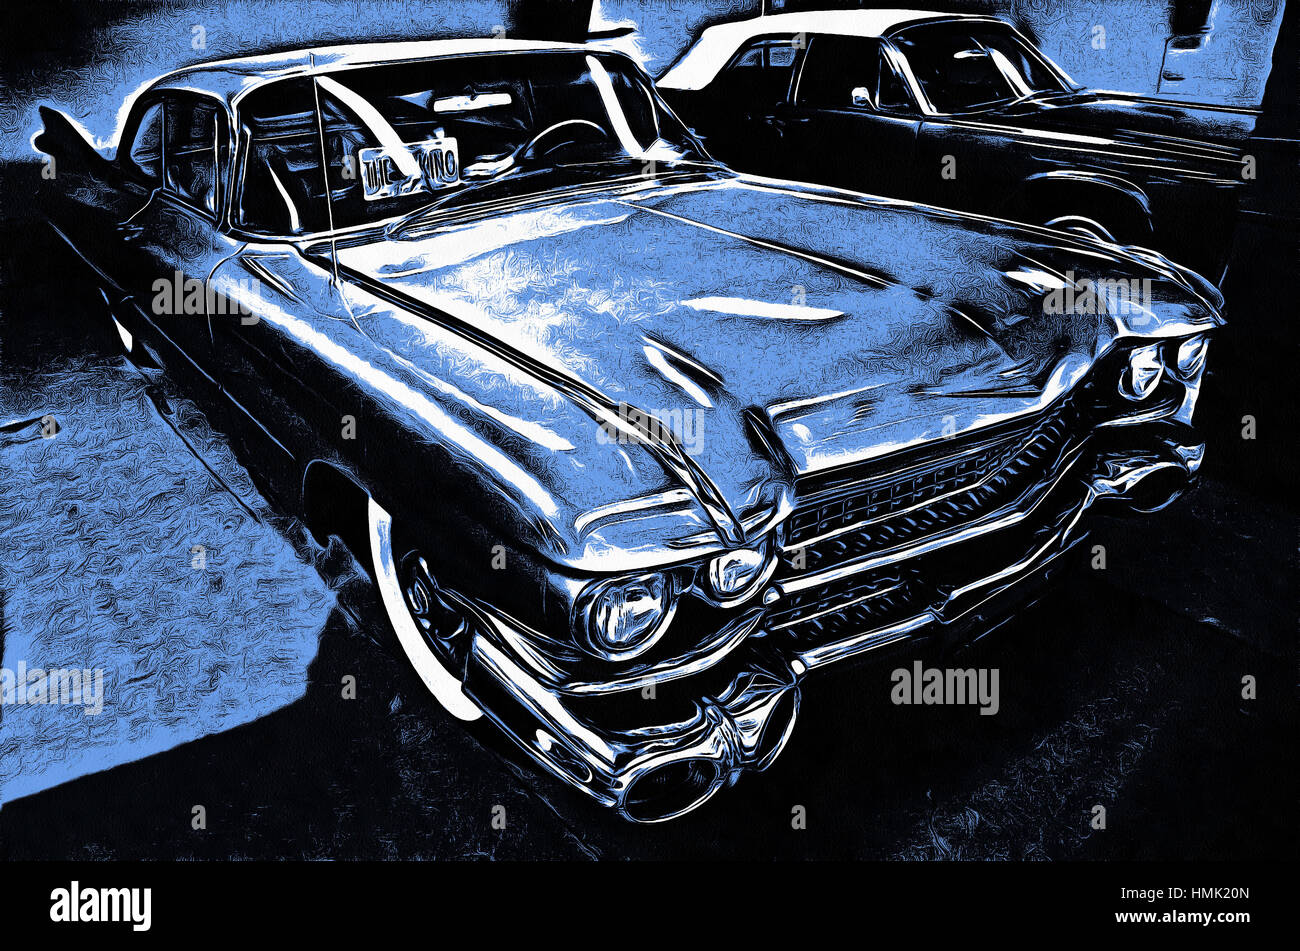 Illustrations Cadillac Coupe De Ville, Year 1959, front view Stock Photo